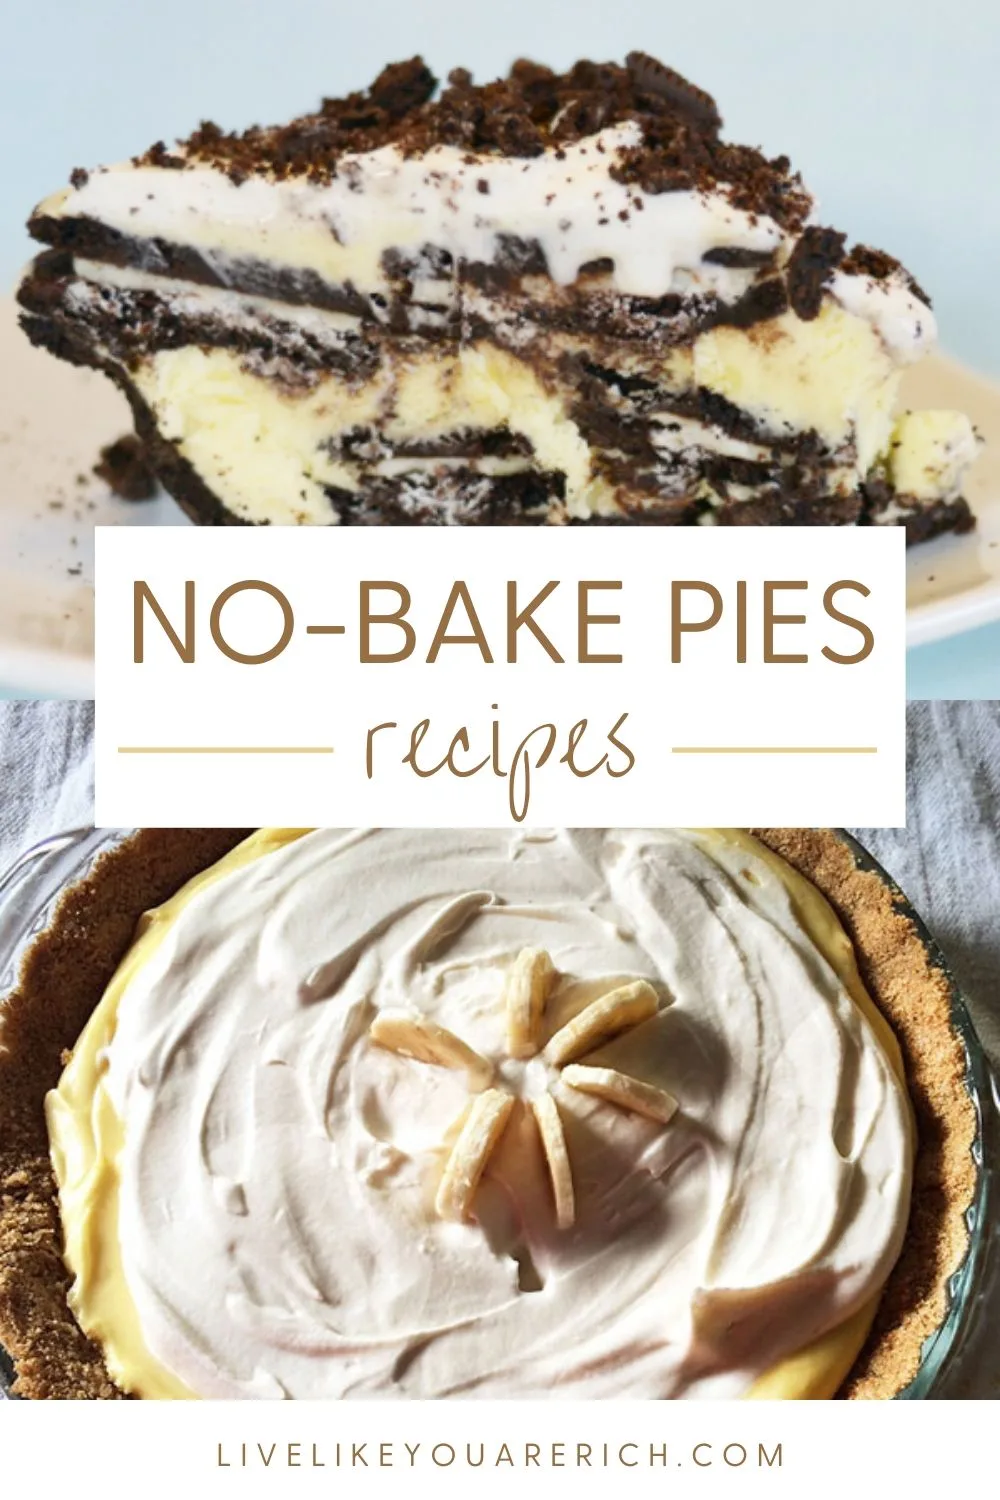 No-bake pies are so easy and quick (especially if you buy pre-made crusts). They can be thrown together in just a few minutes of prep and a few hours of chilling. They are a great idea for contributing to a party, potluck, or dinner. So, I thought I’d do a round-up that I can refer to for ideas on quick and easy no-bake pie desserts. And I’m super impressed by all of the options. I hope you enjoy them too!